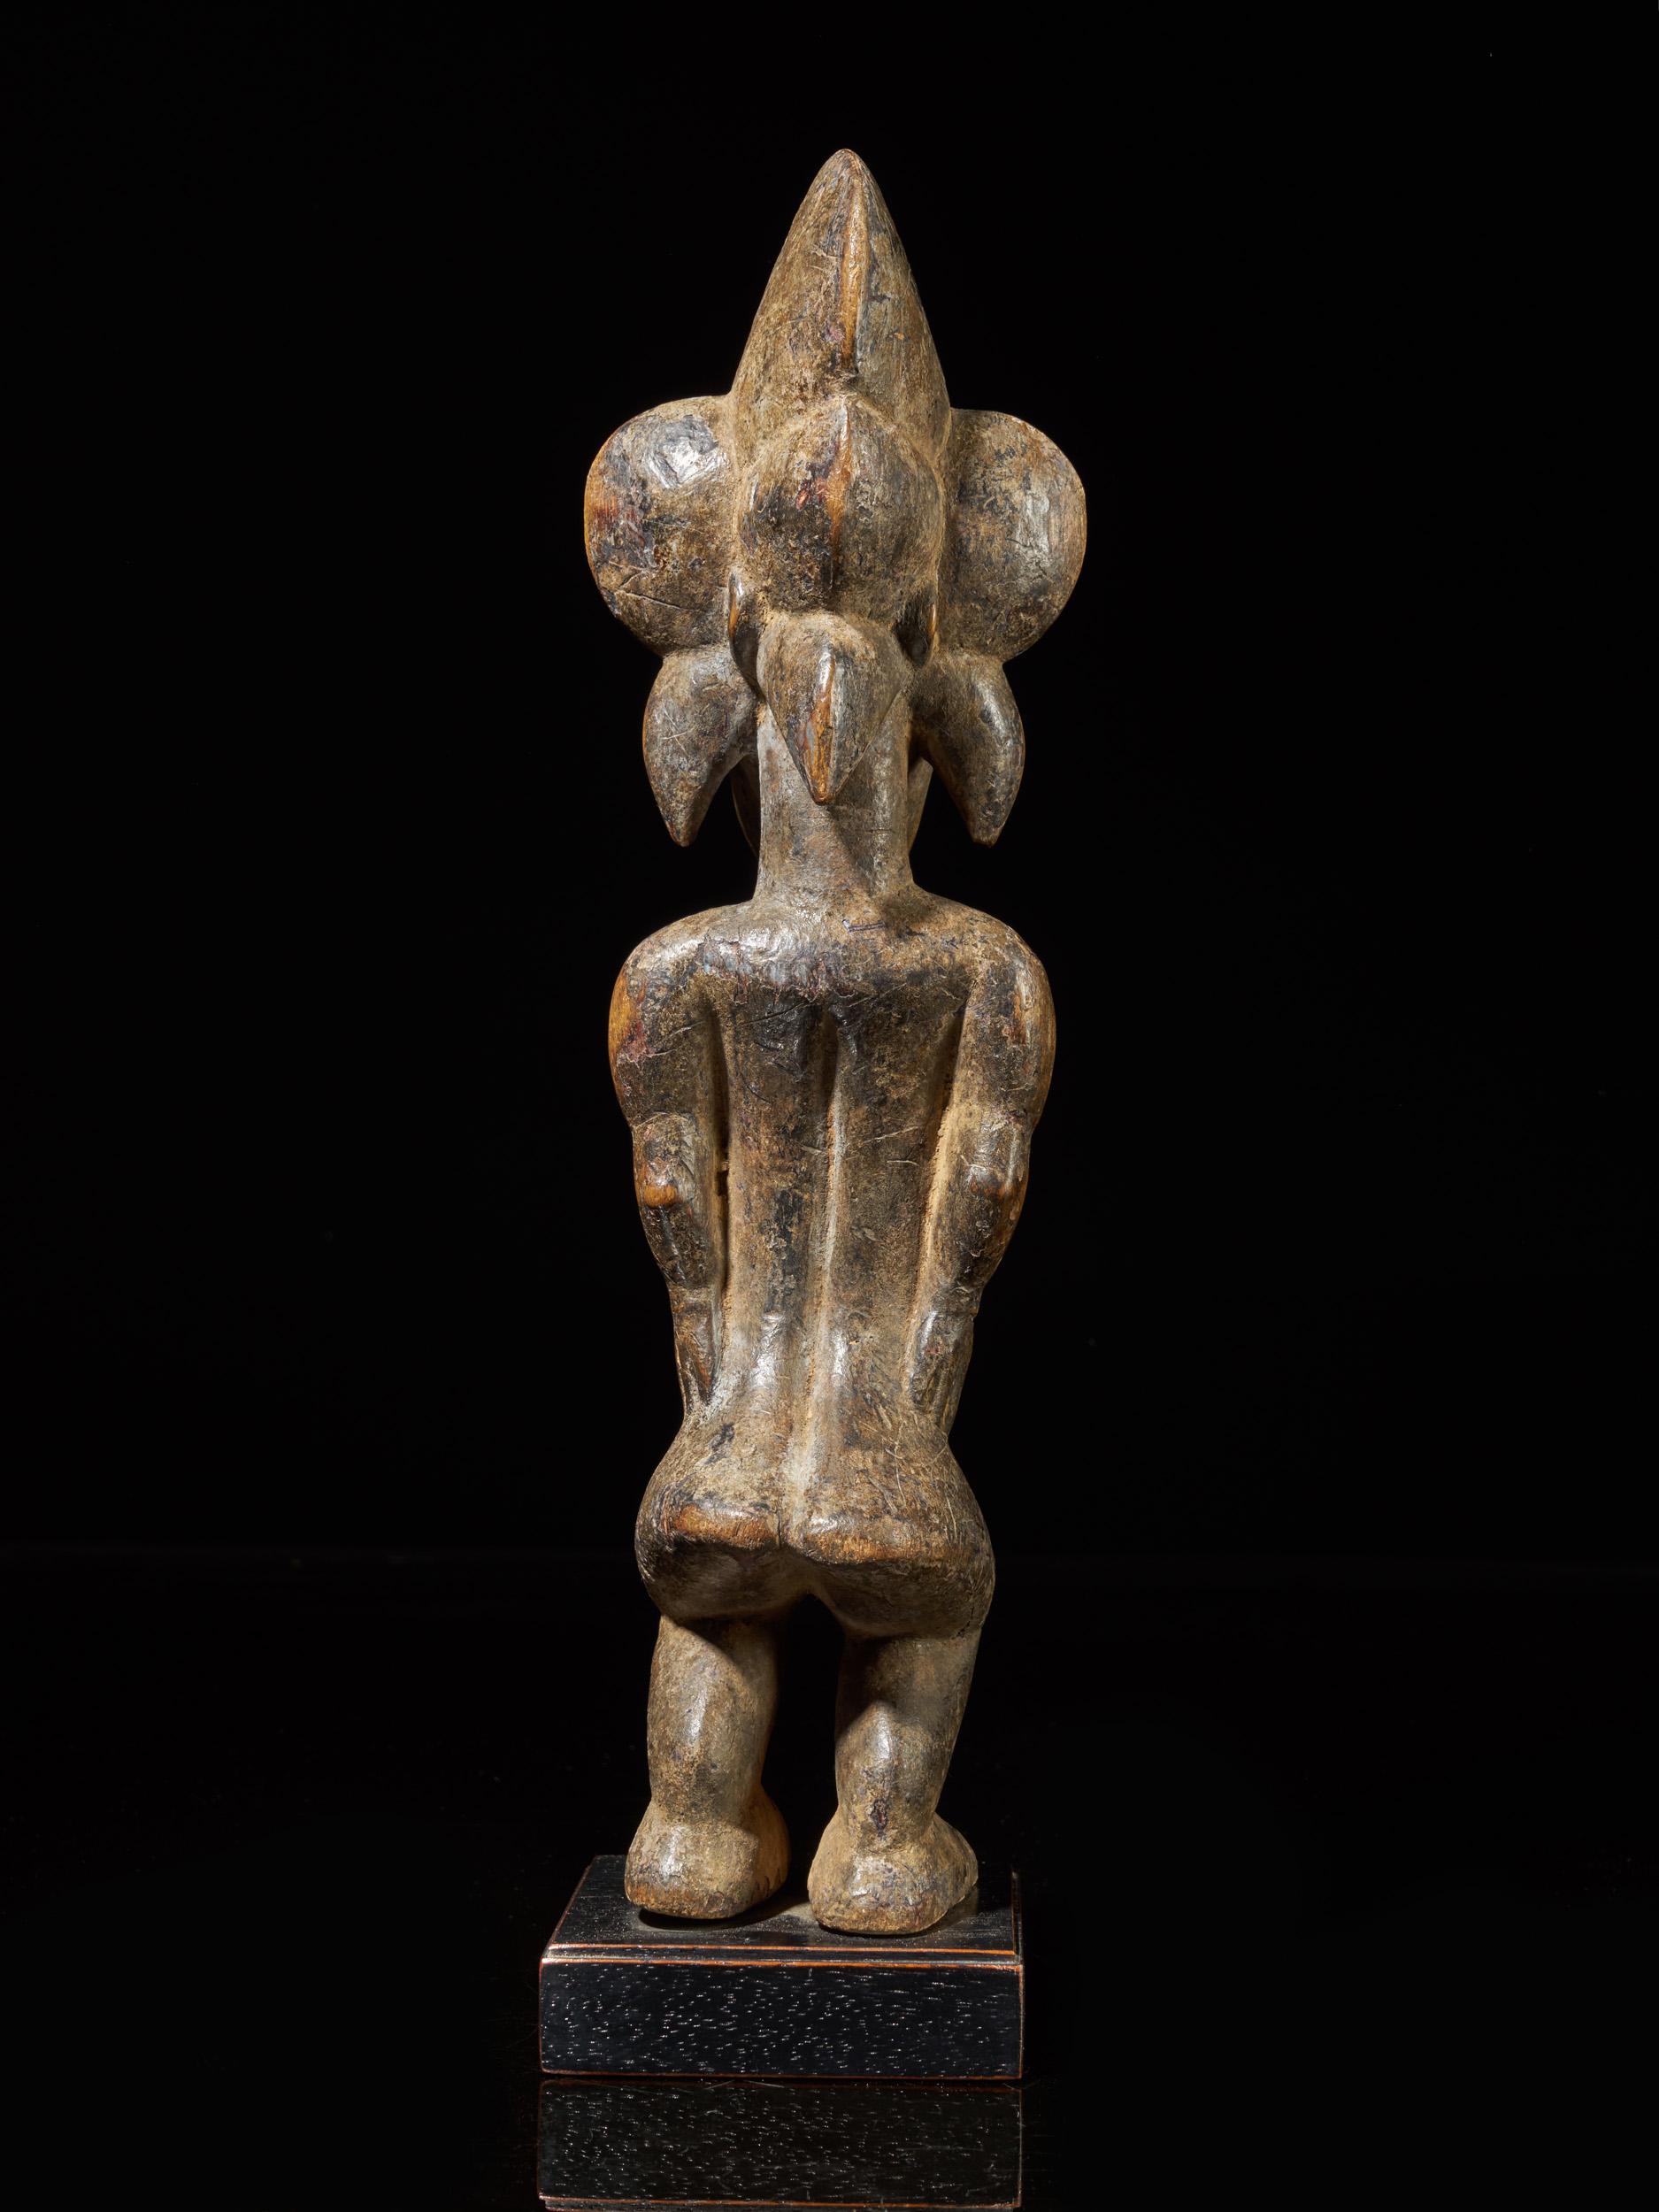 The Dolichocephalic head is on top of a robust long neck, sagittal crested headdress symbolizing mythological Birds (hornbills probably), the shoulders broad, the strong arms and legs bent, the hands to each other side of the hips, protruding belly